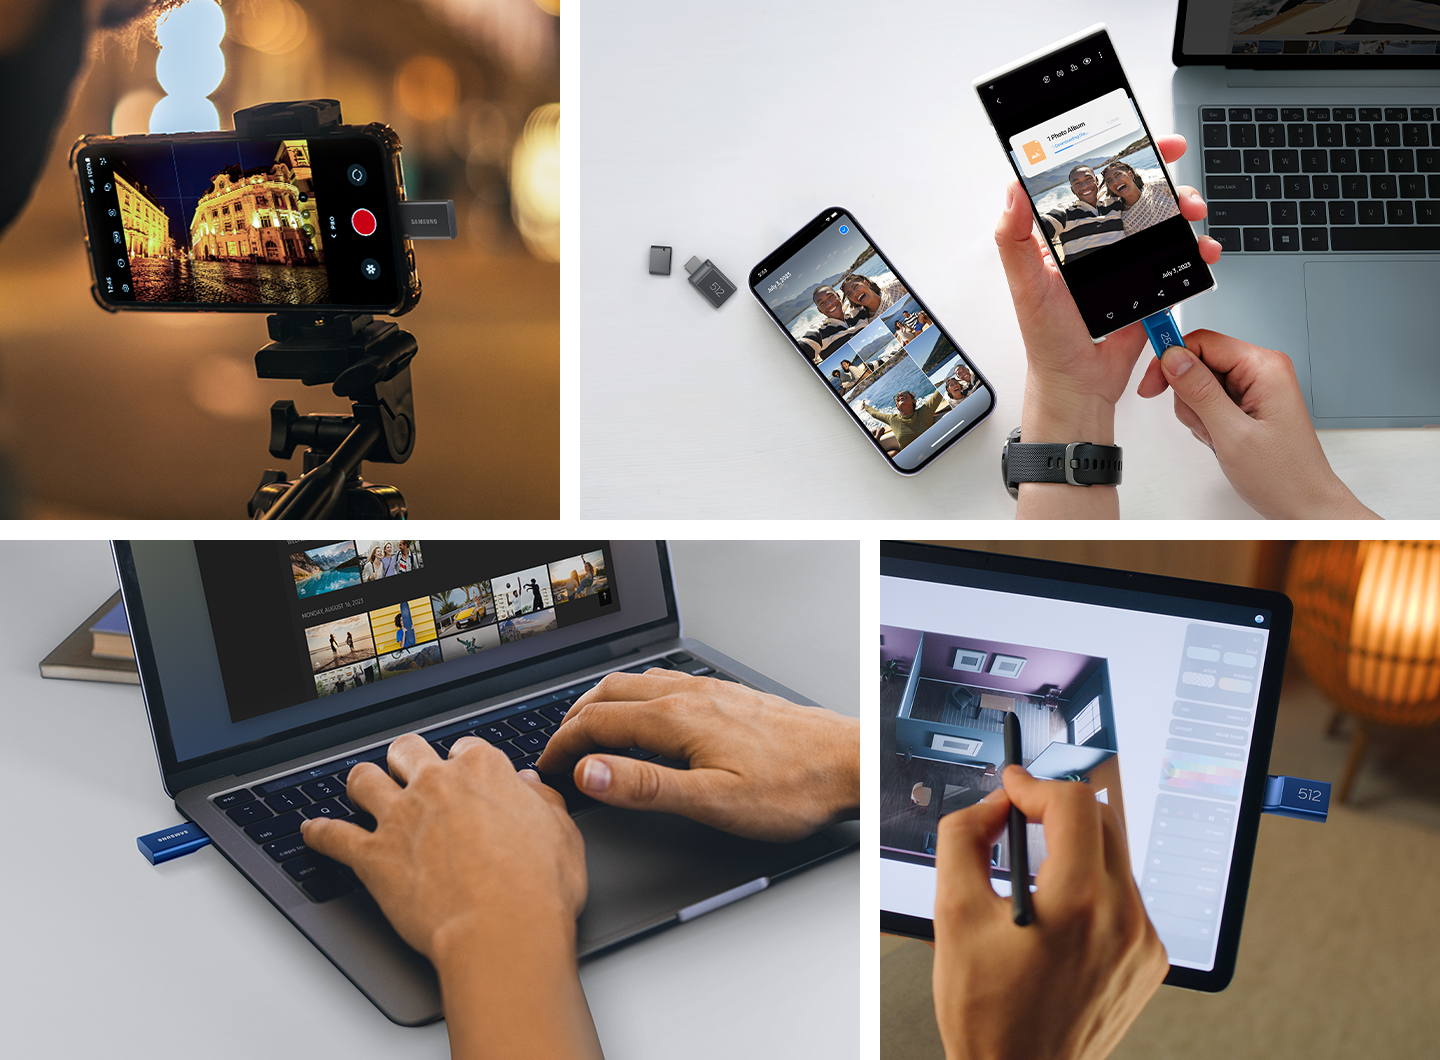 A total of four areas are used to show examples of Type-C™ usage. In the first area, video is being shot with a smartphone plugged in with Type-C™. In the second area, files are exchanged between various devices such as smartphones and laptops through Type-C™. In the third area, Type-C™ is plugged into a laptop. In the fourth and final area, the tablet is plugged in with Type-C™.